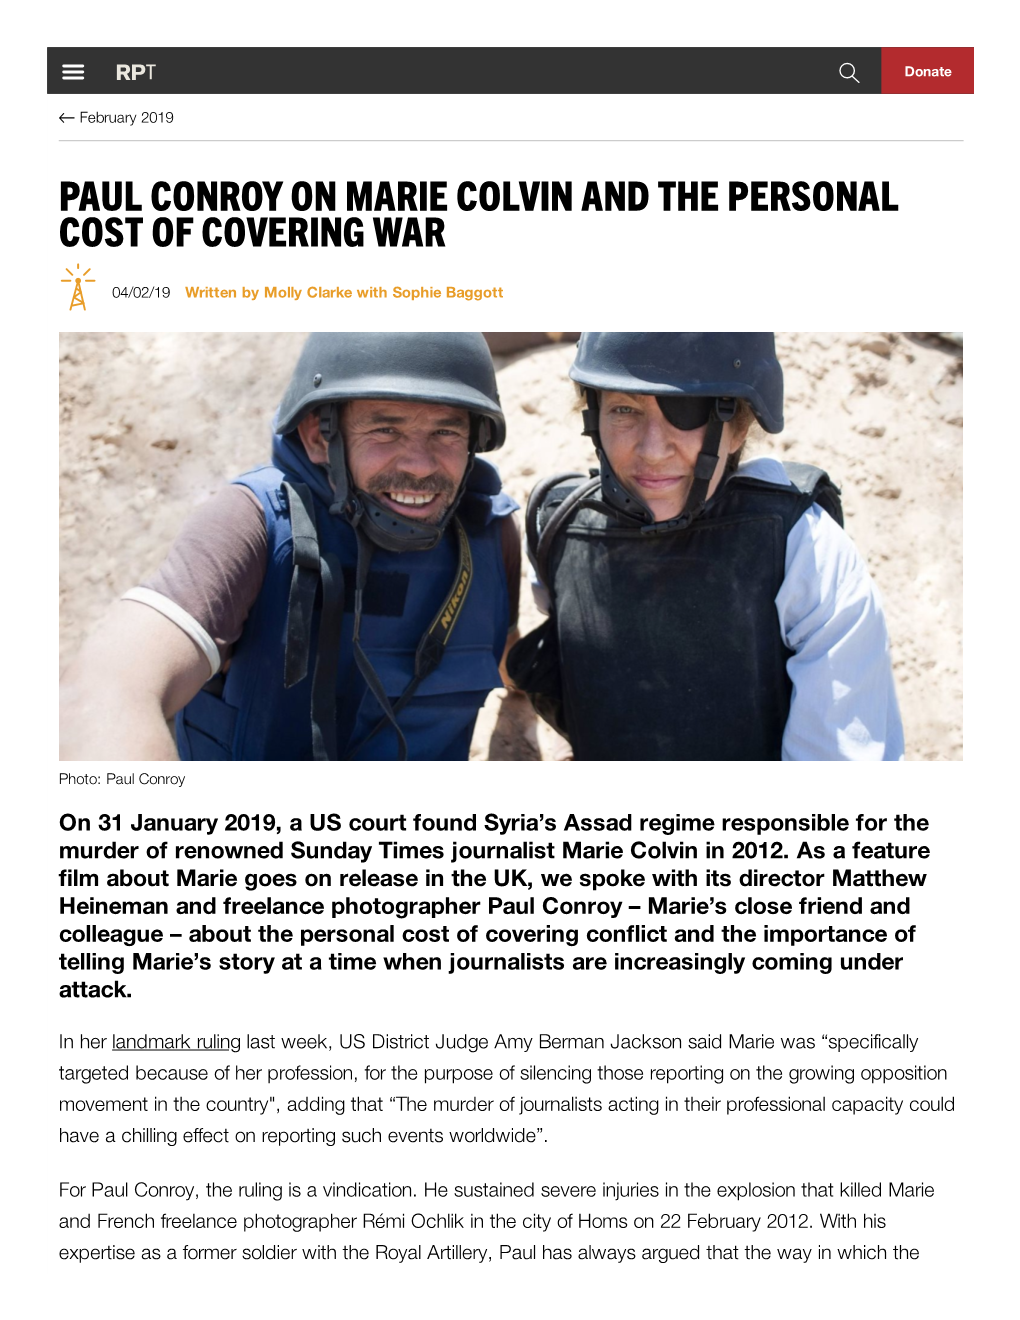 Paul Conroy on Marie Colvin and the Personal Cost of Covering War